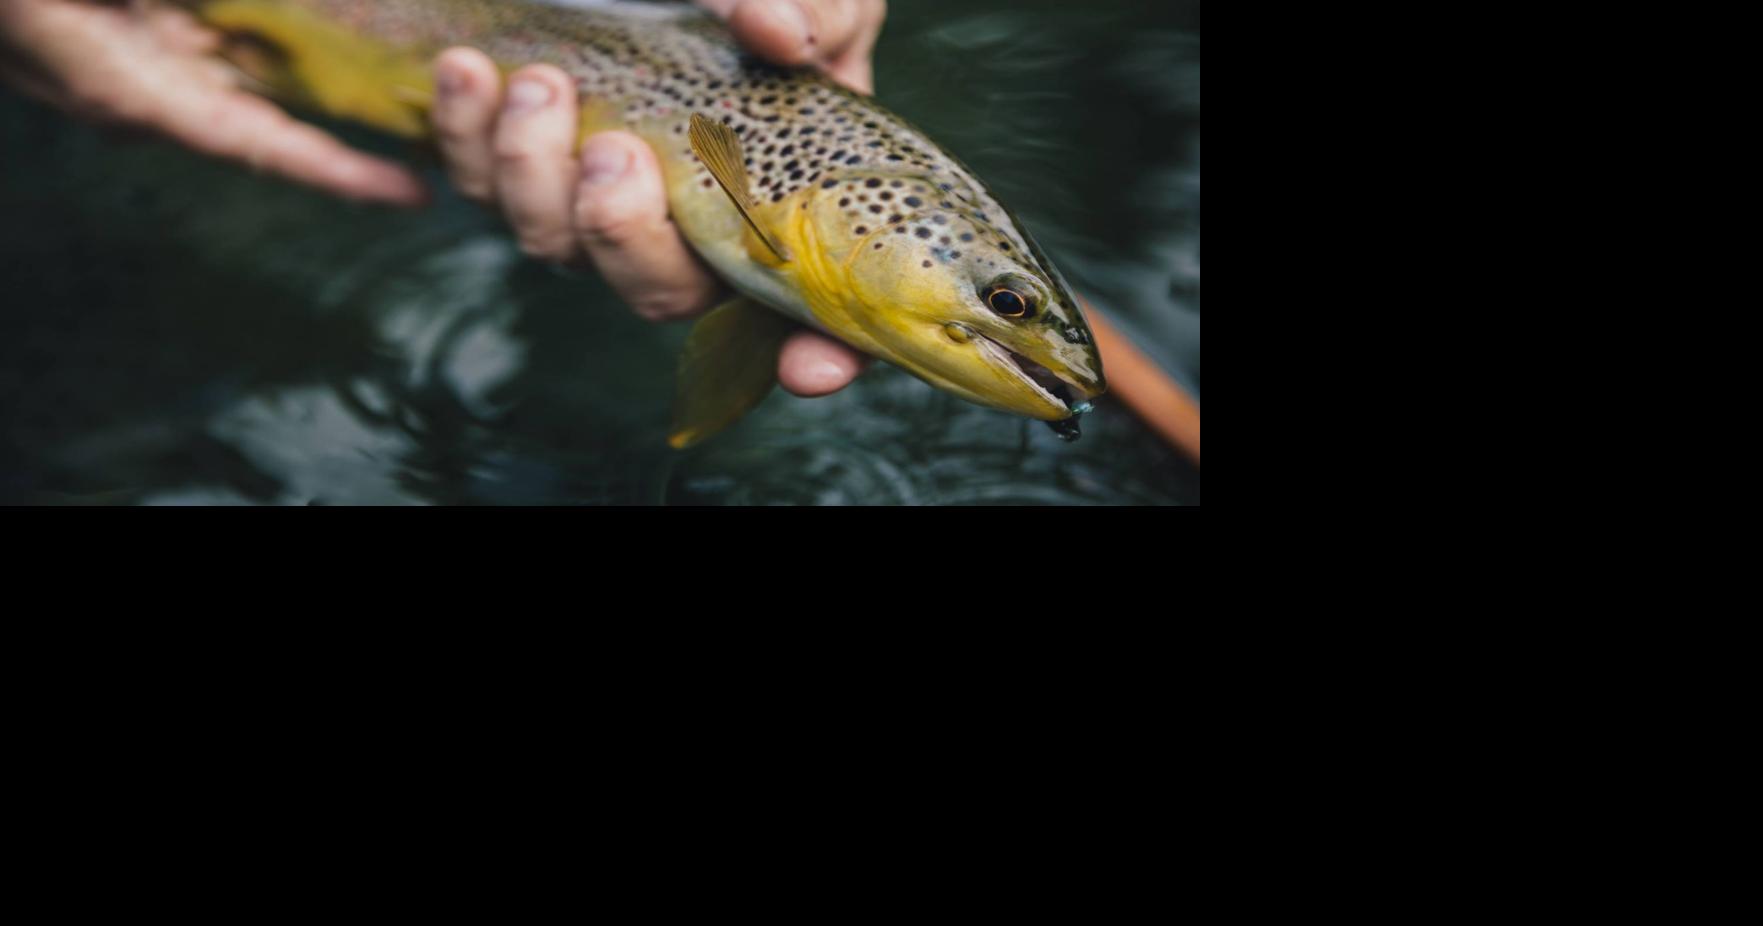 Delayed-harvest trout waters open Oct. 1, Play